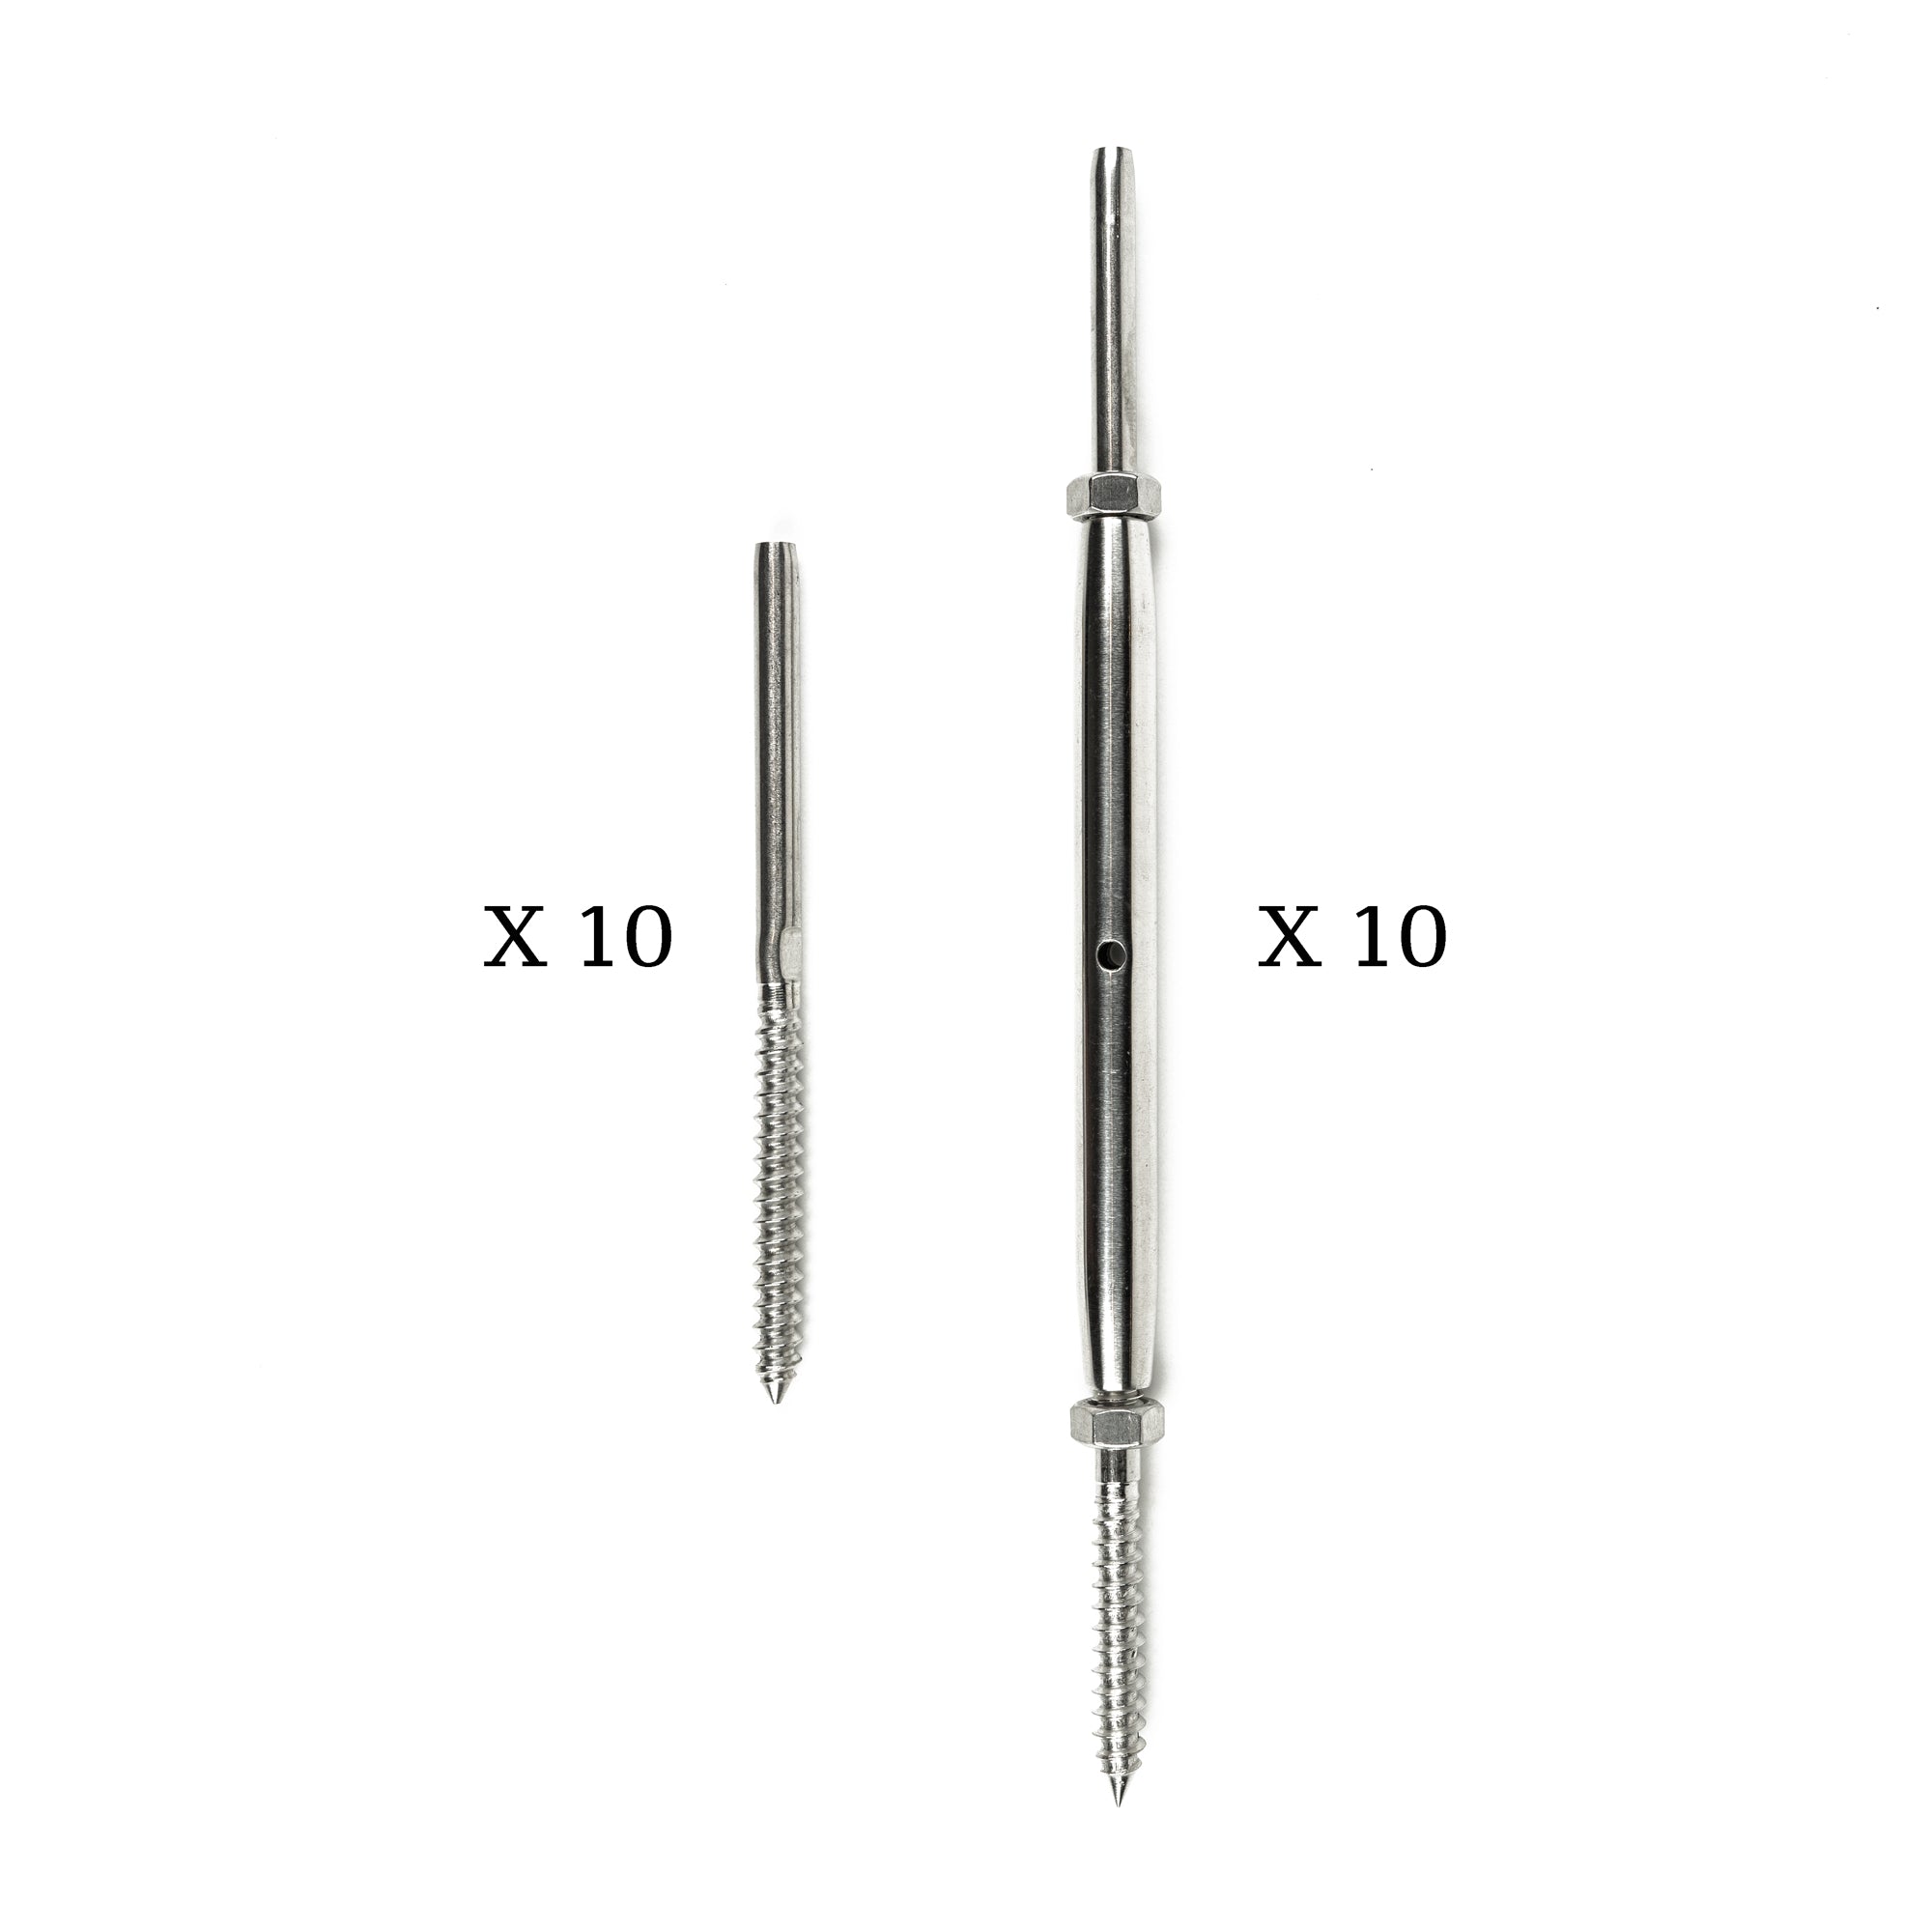 Swage Turnbuckle Stainless Steel Cable Tensioners for 1/8” and 3/16” Cable and Fixed End (pack of 10)